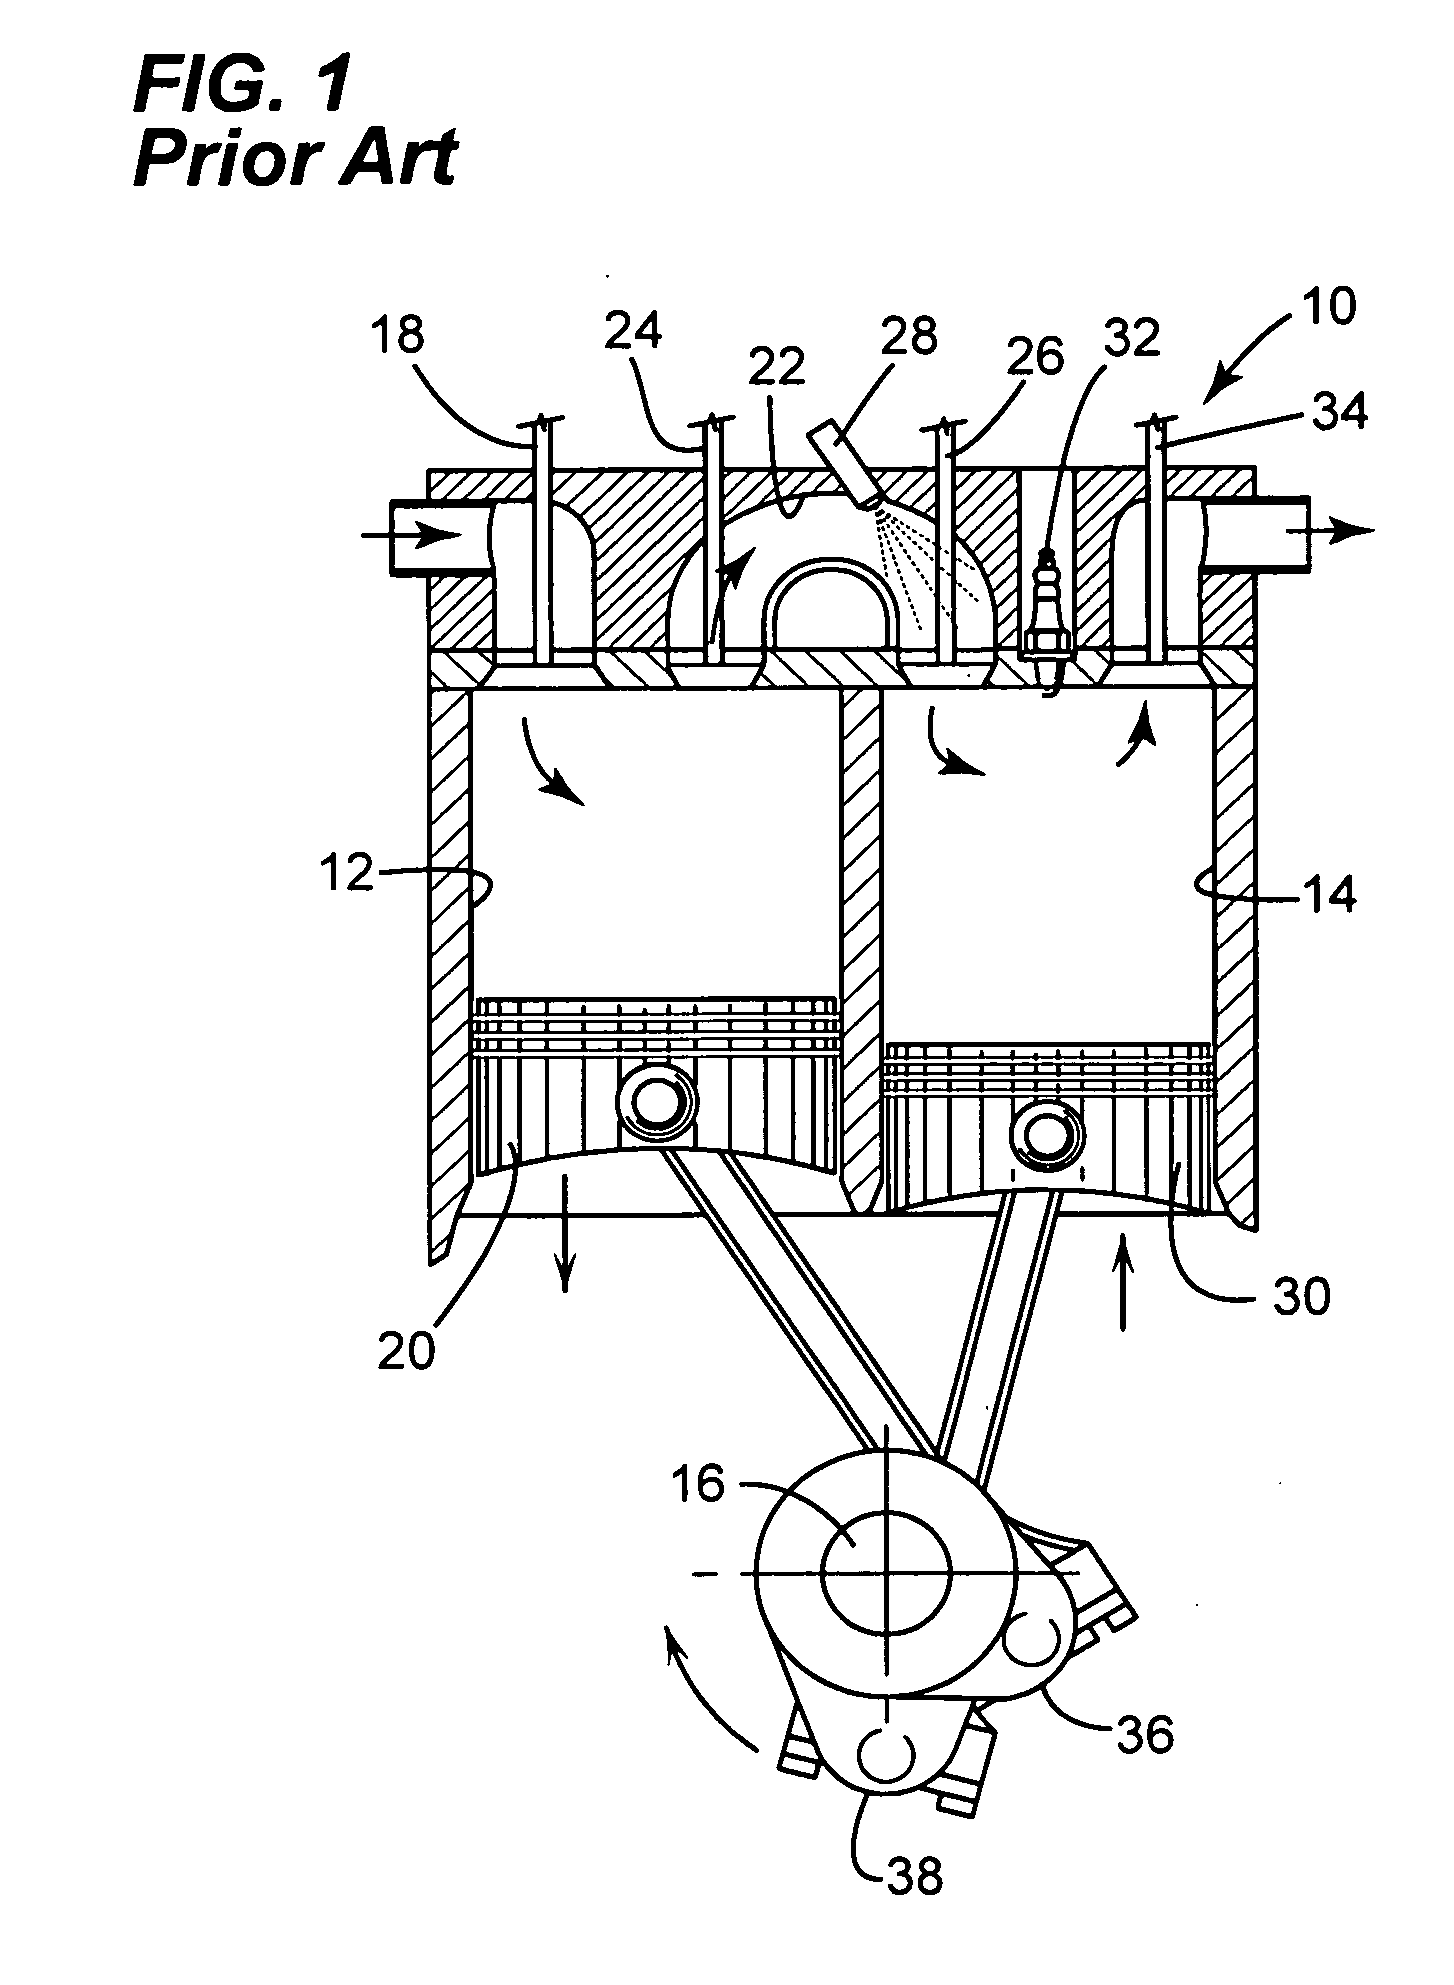 Seating control device for a valve for a split-cycle engine